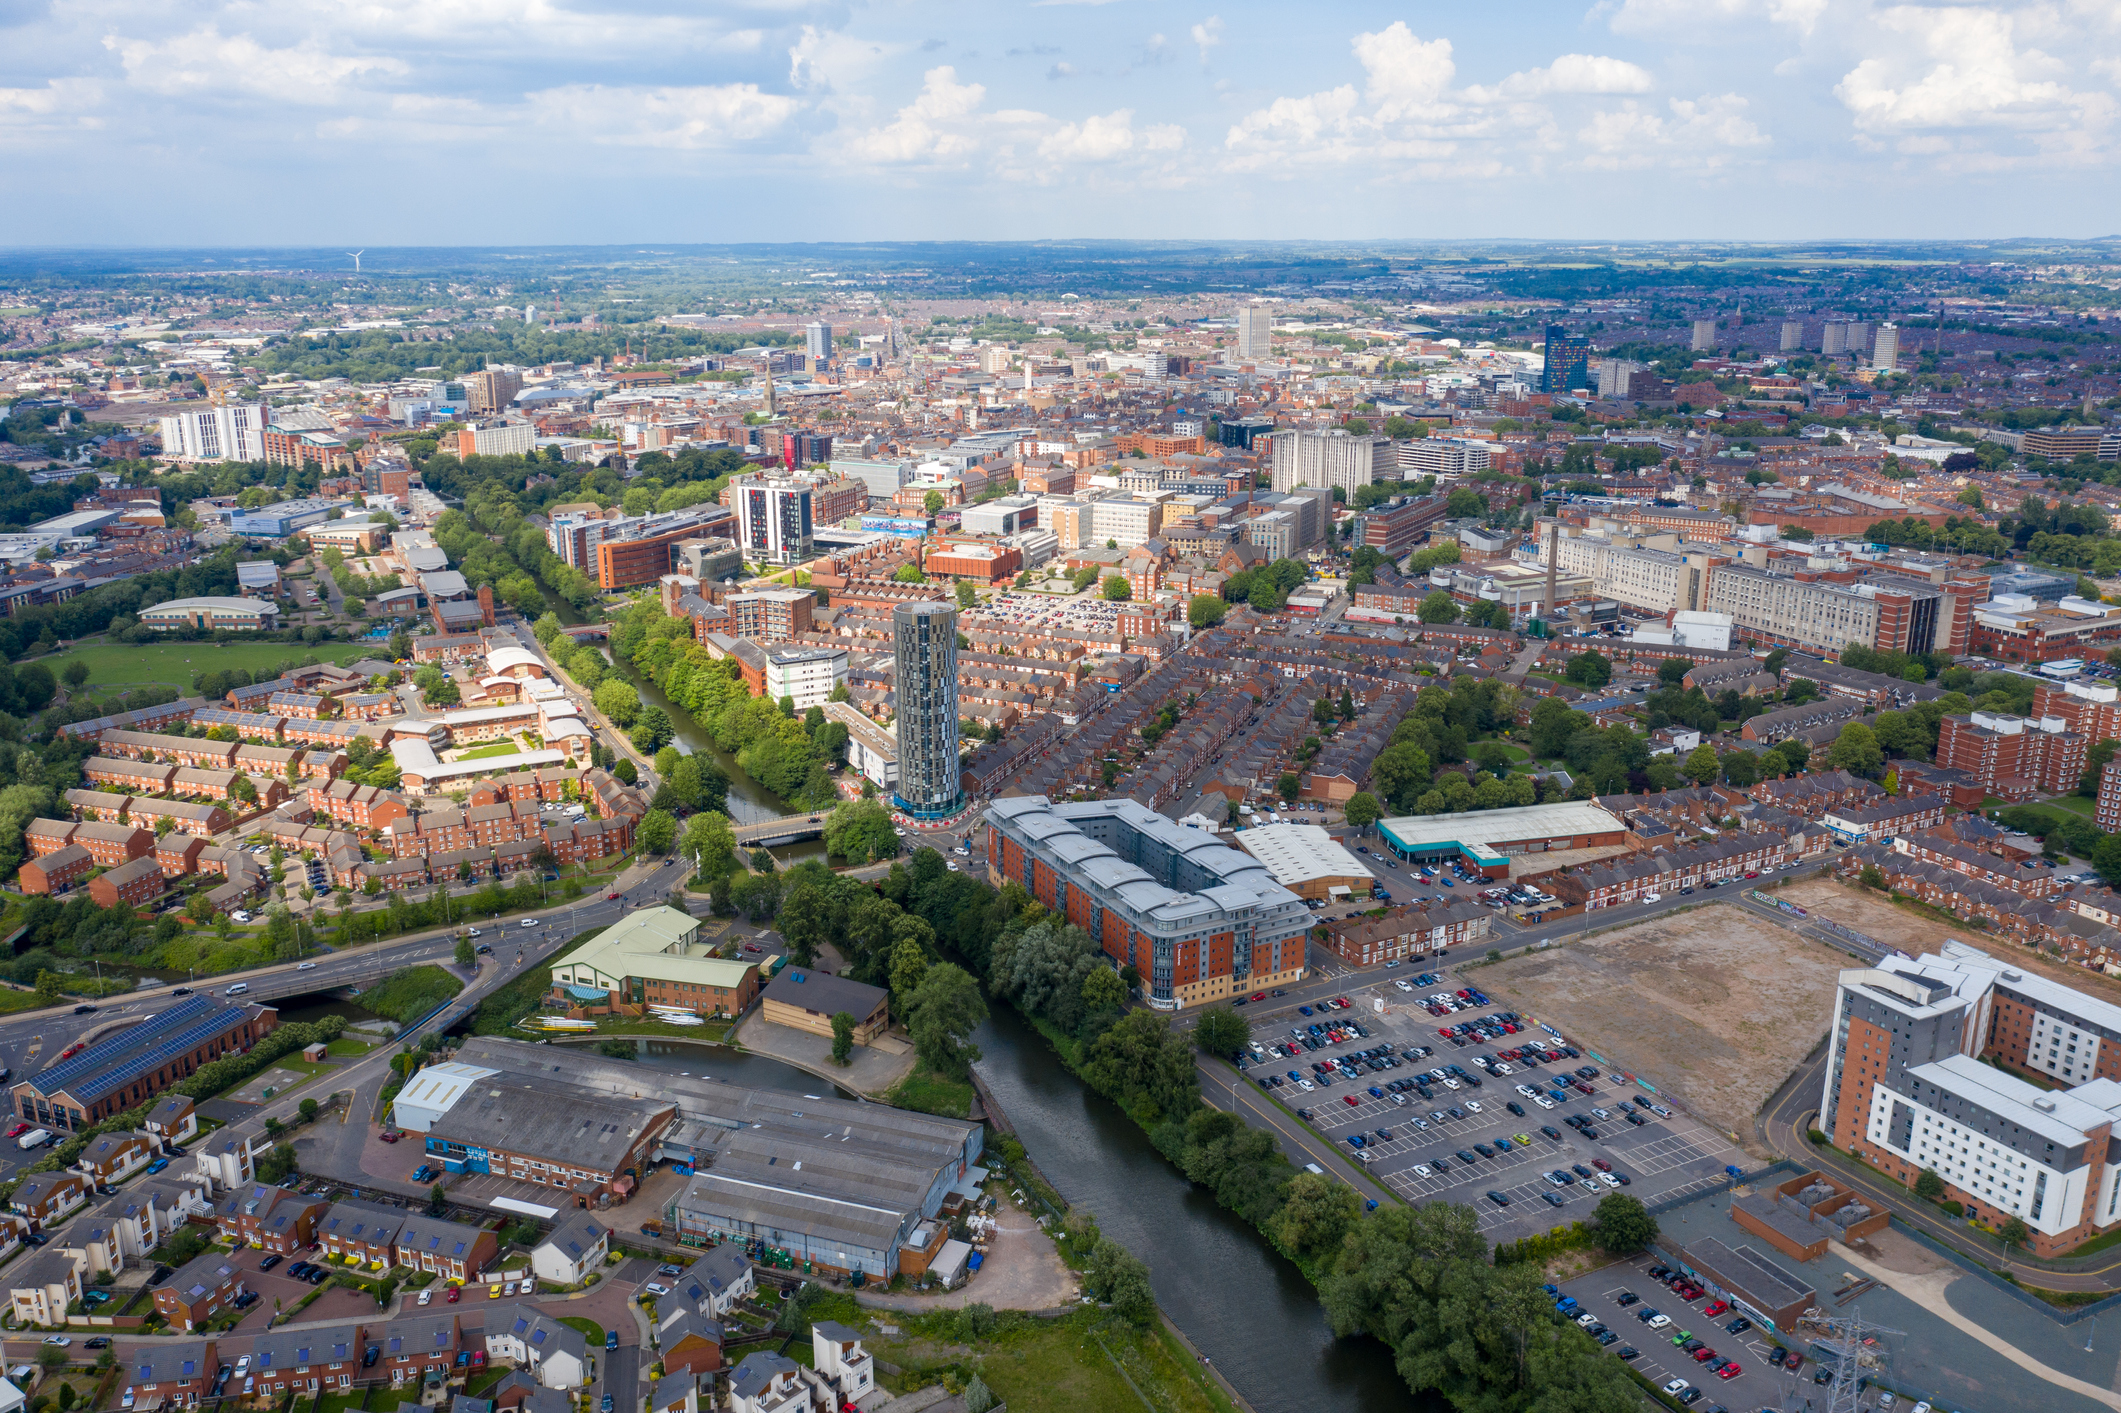 Cityscape of Leicester under clear blue skies